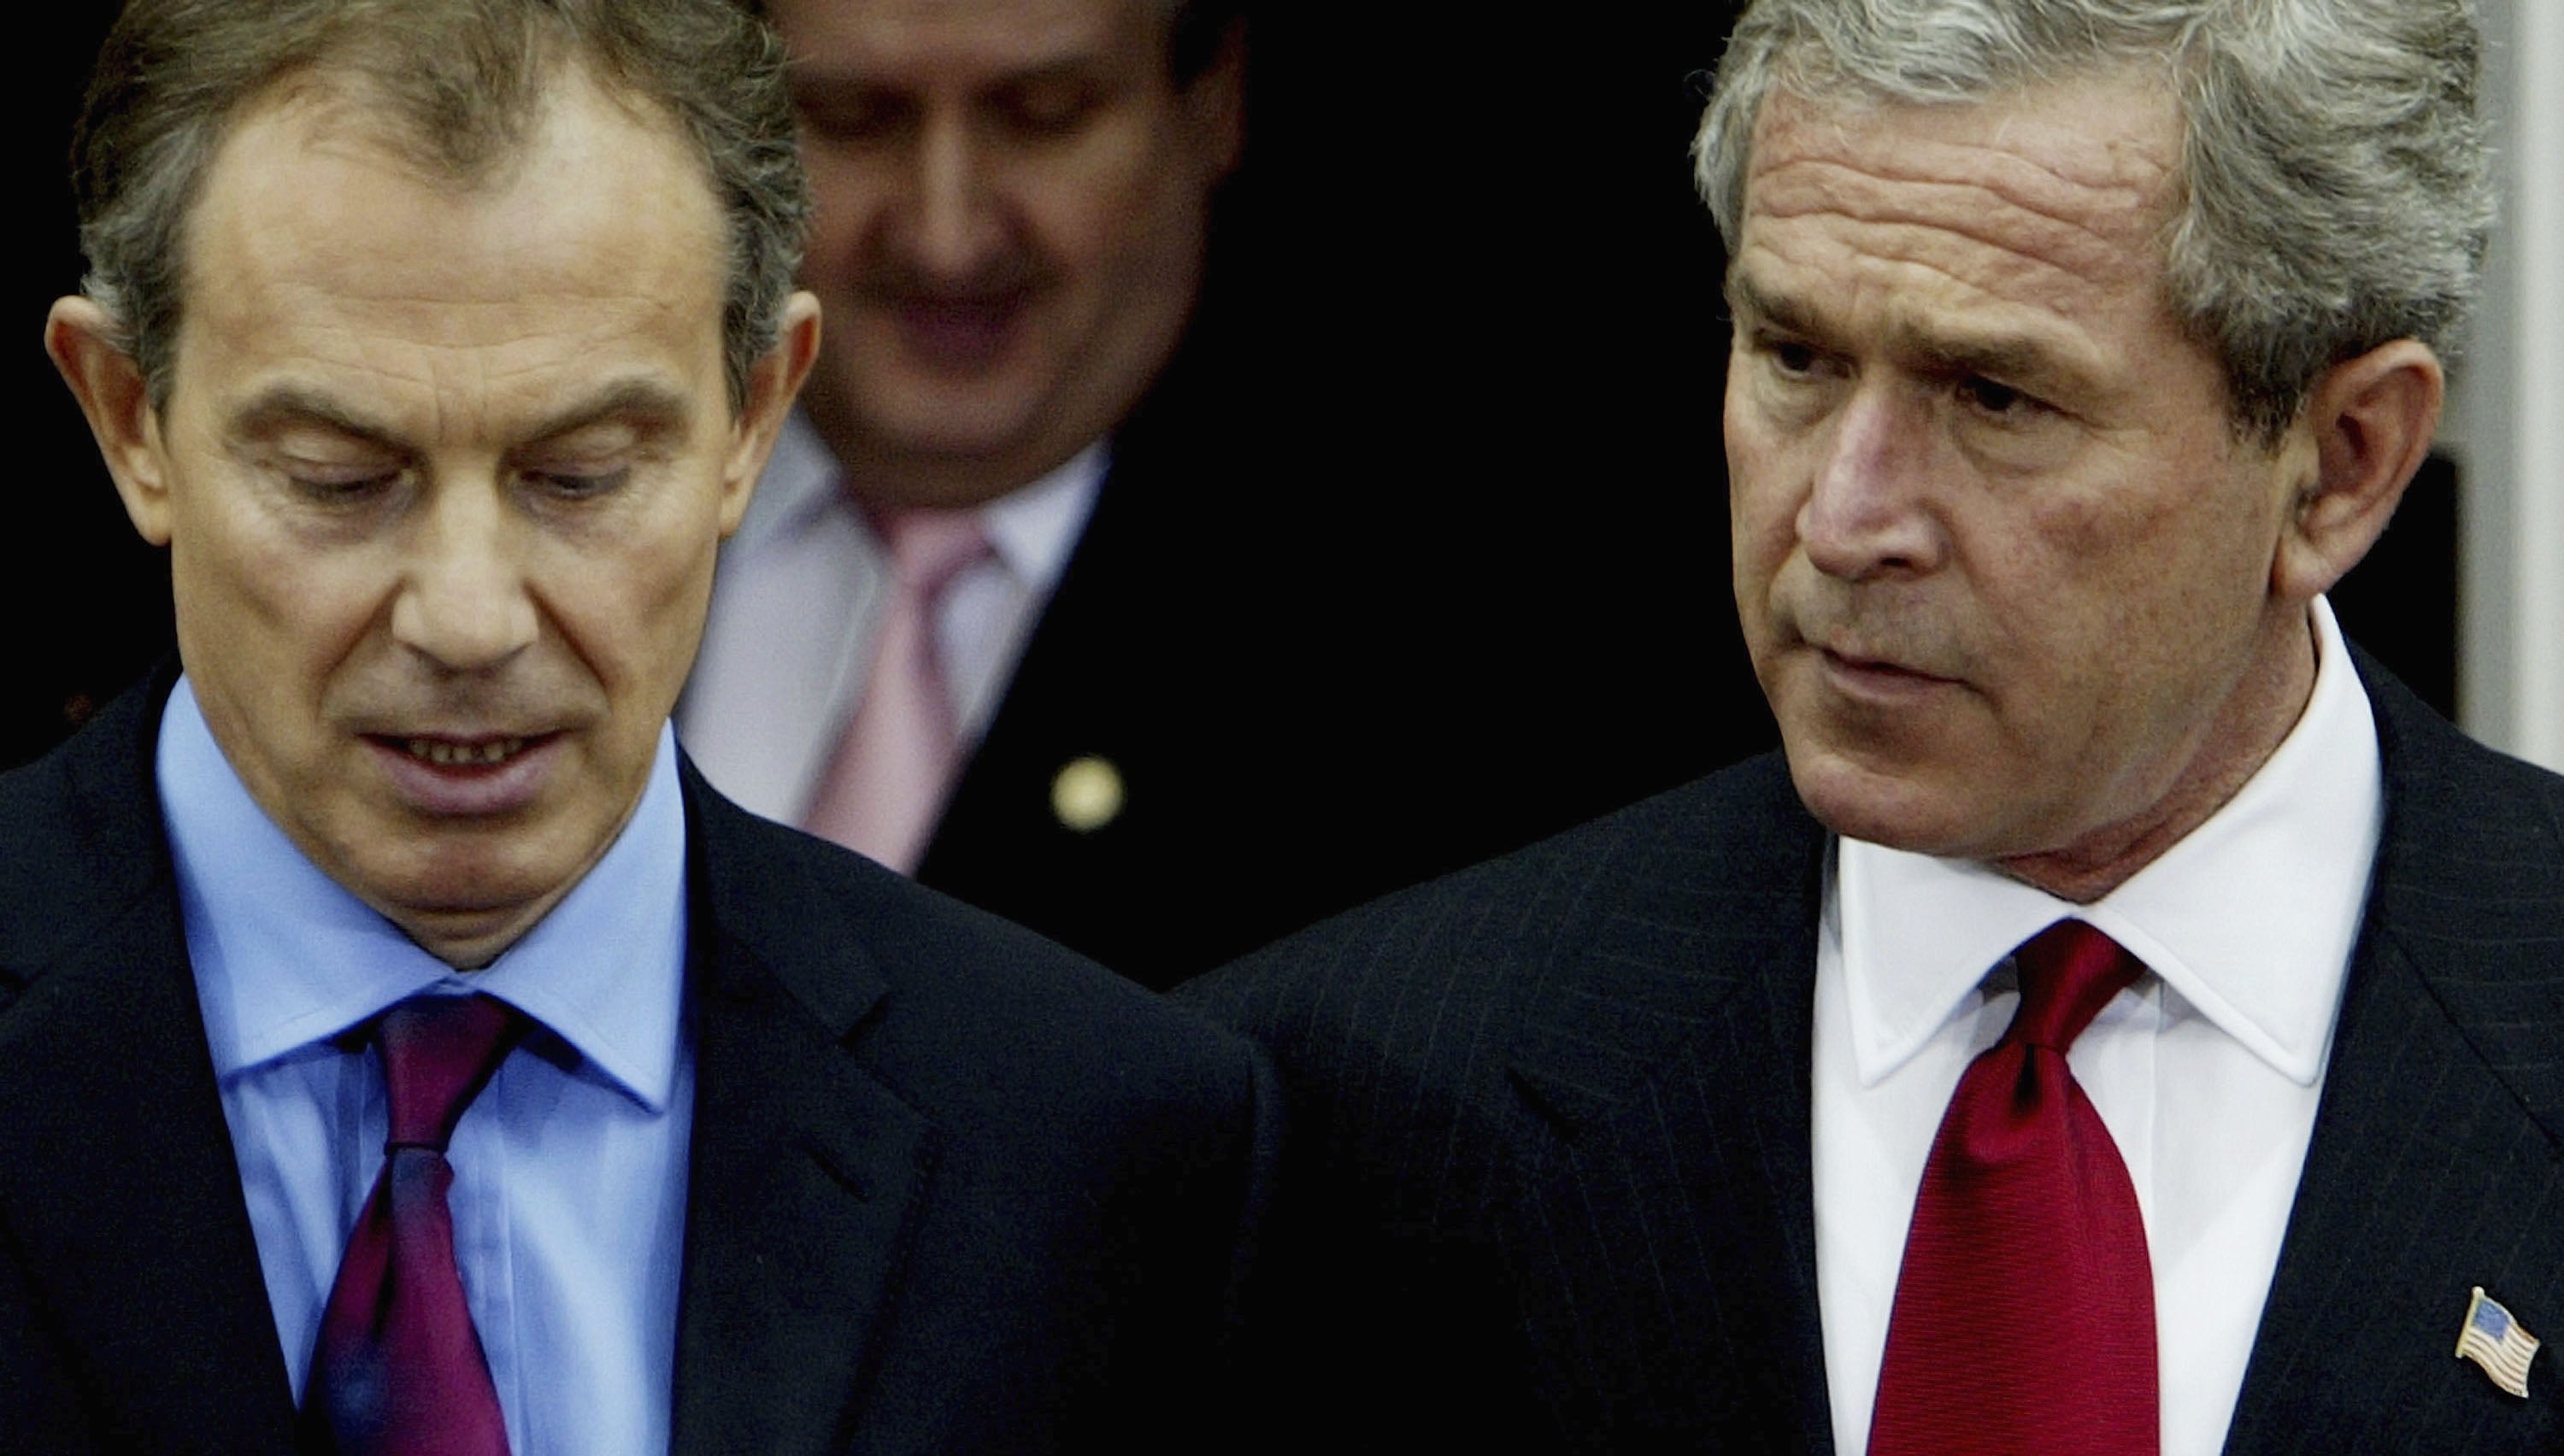 Tony Blair was persuaded by George Bush to support the 2003 invasion of Iraq